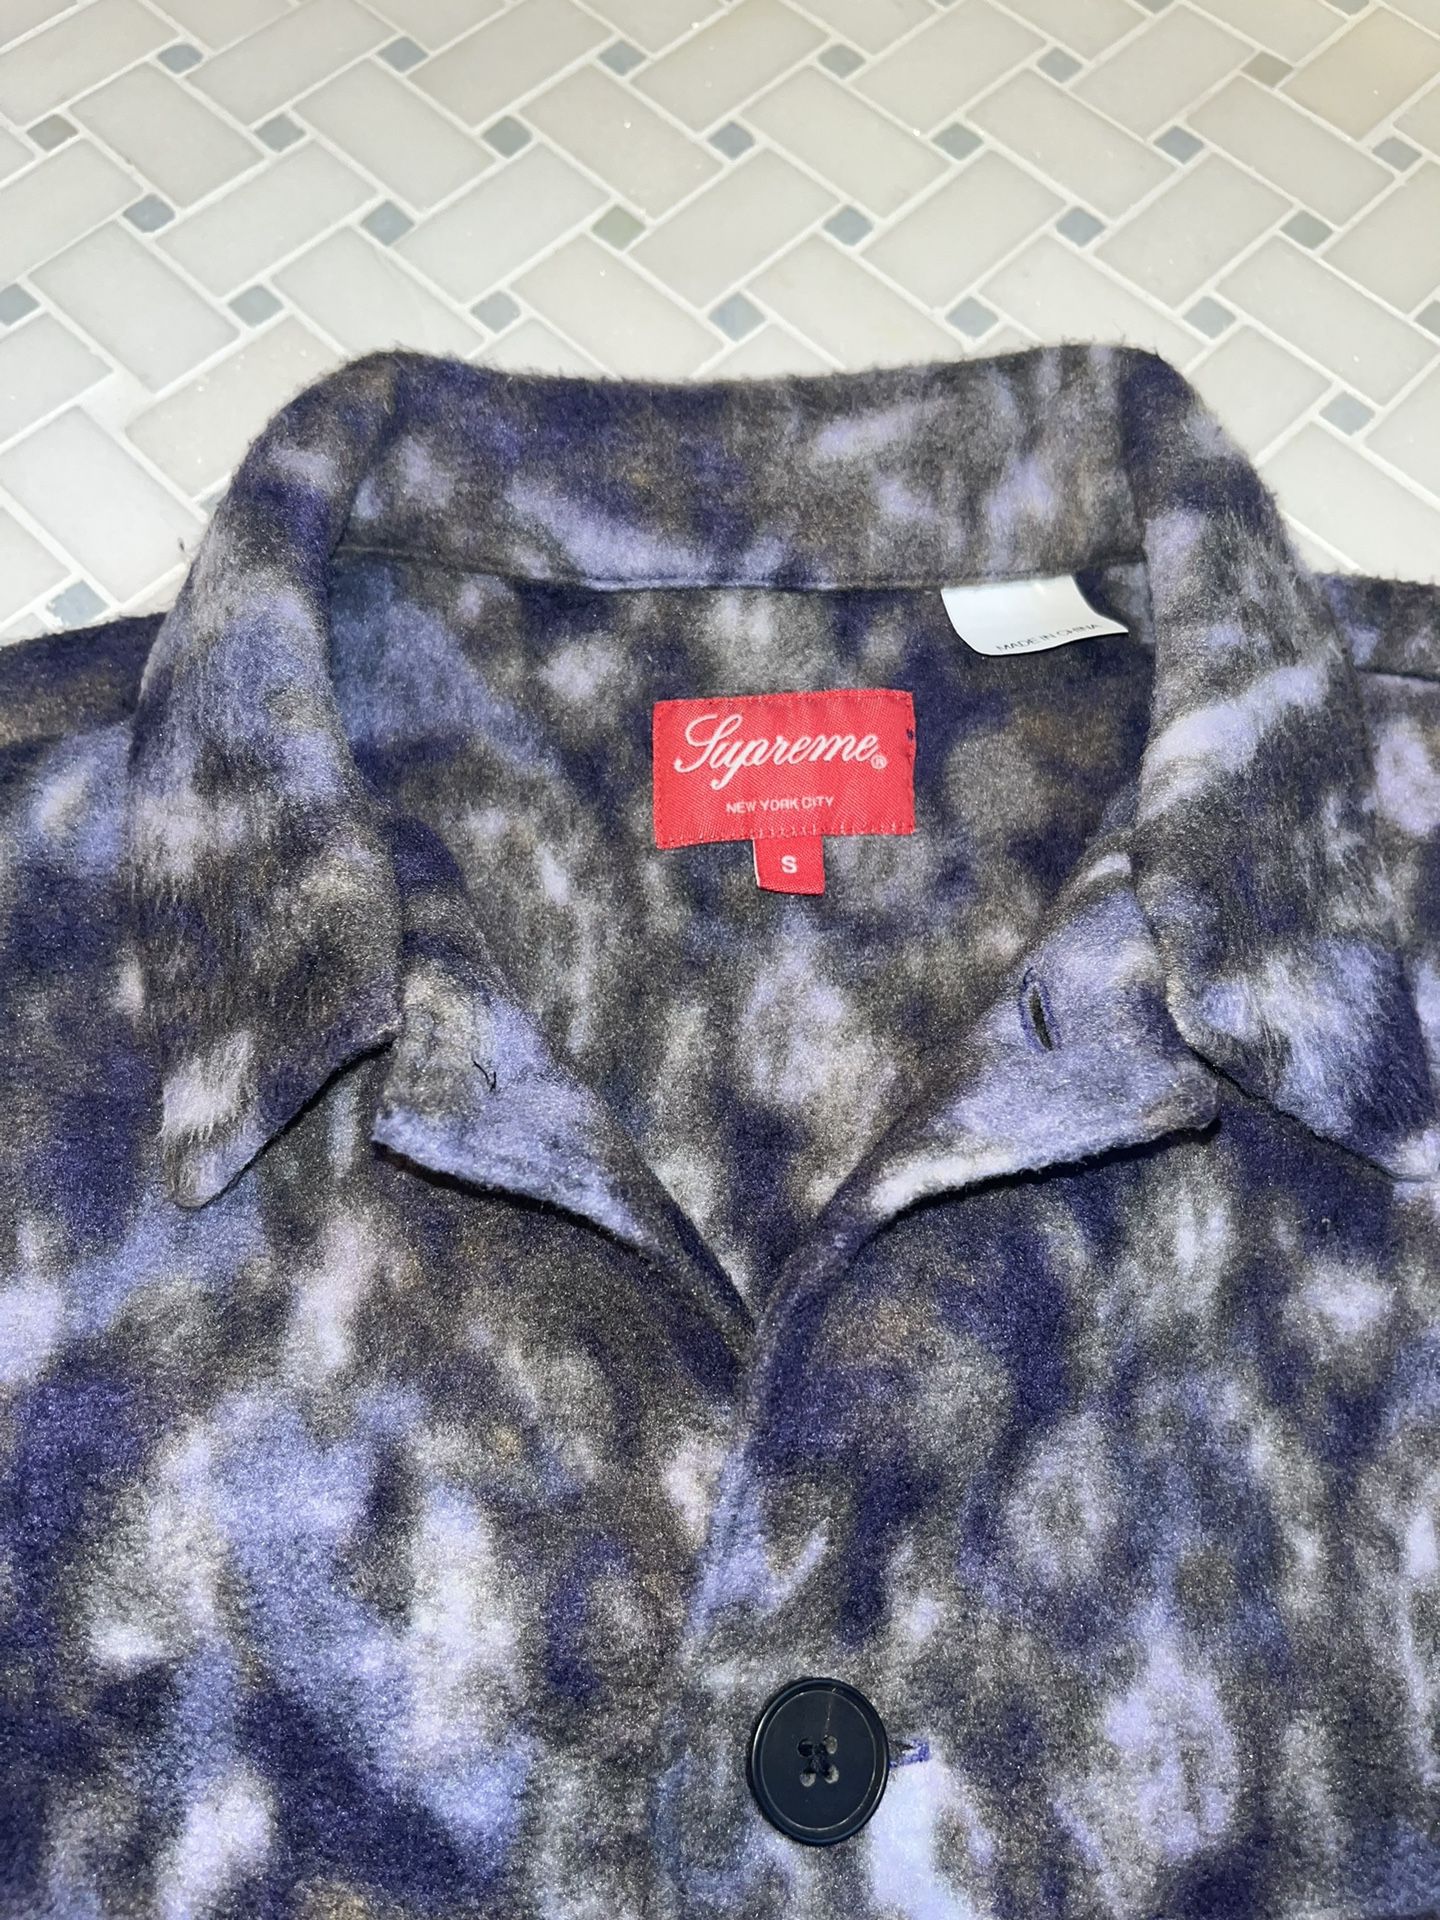 Mens Supreme Paisley Fleece Button Up Shirt Purple Small for Sale in  Washington, DC - OfferUp